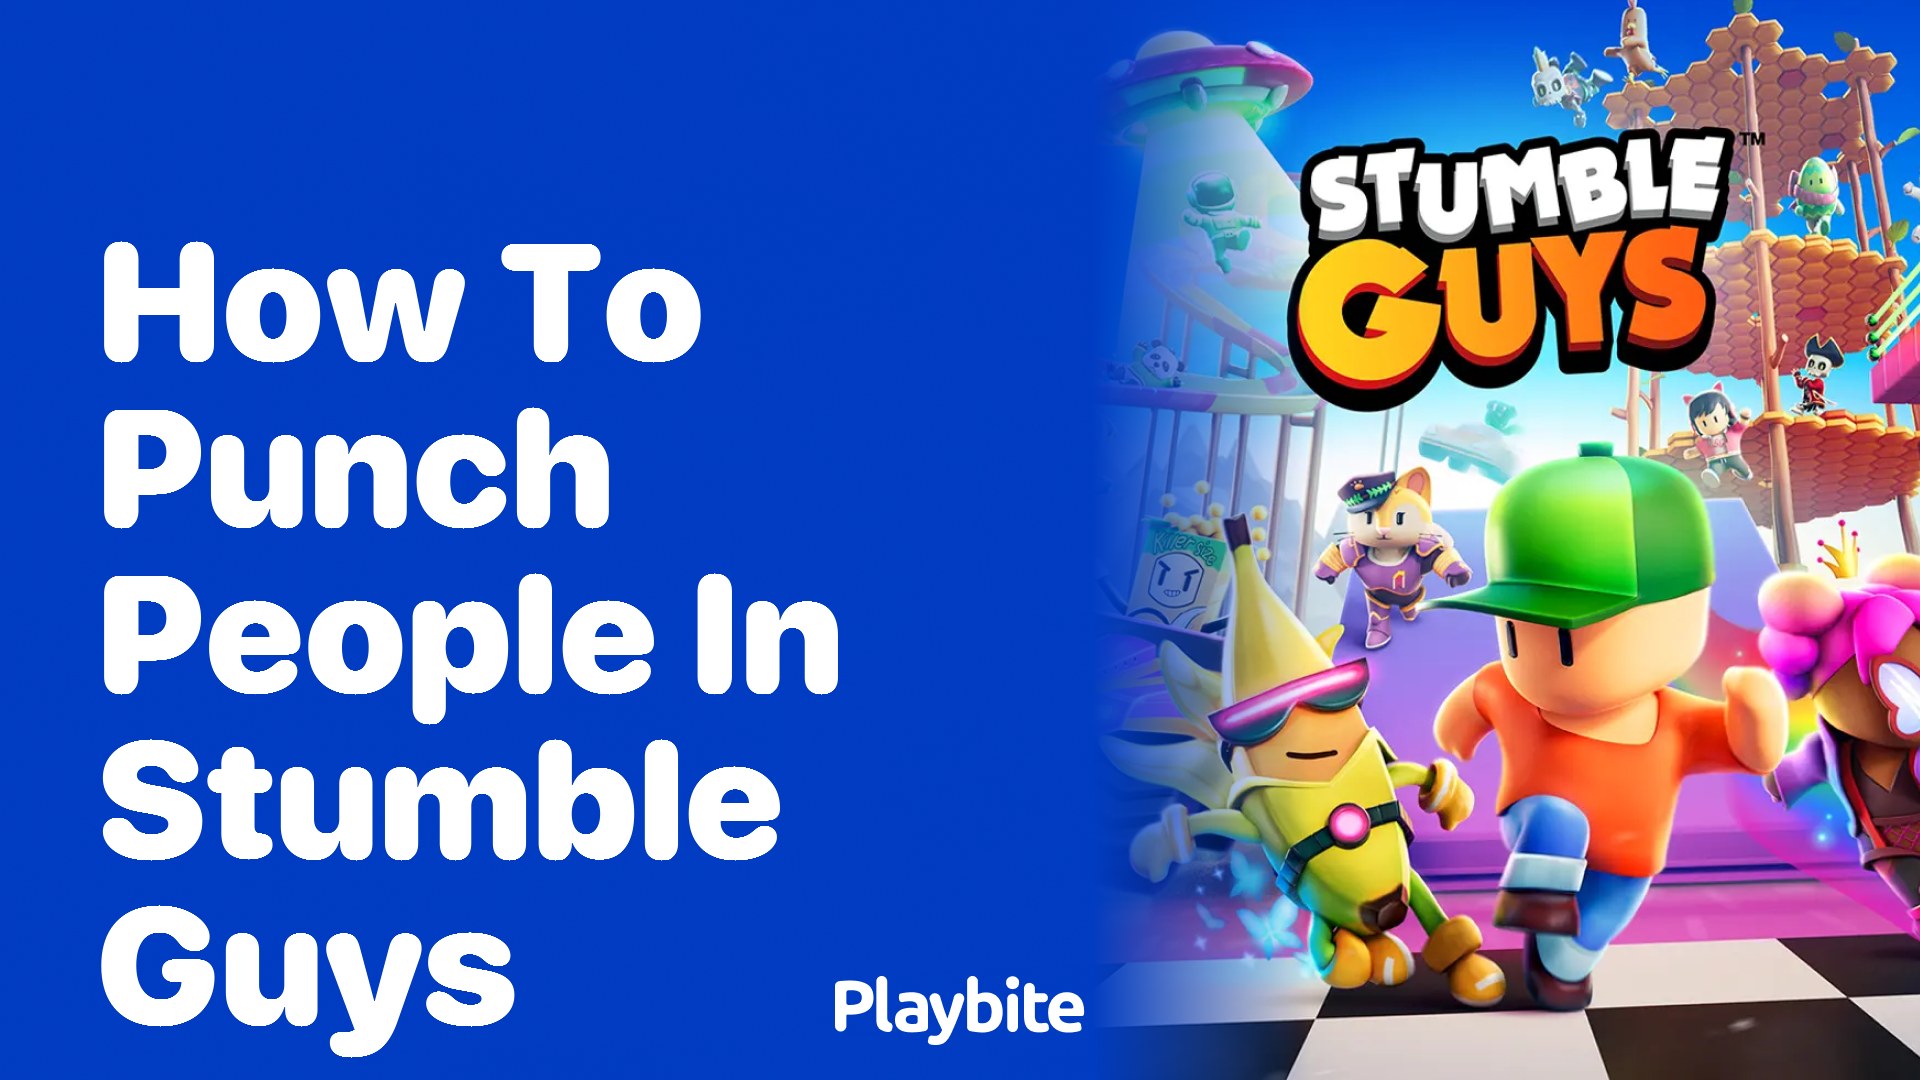 How to Punch People in Stumble Guys: A Fun Guide